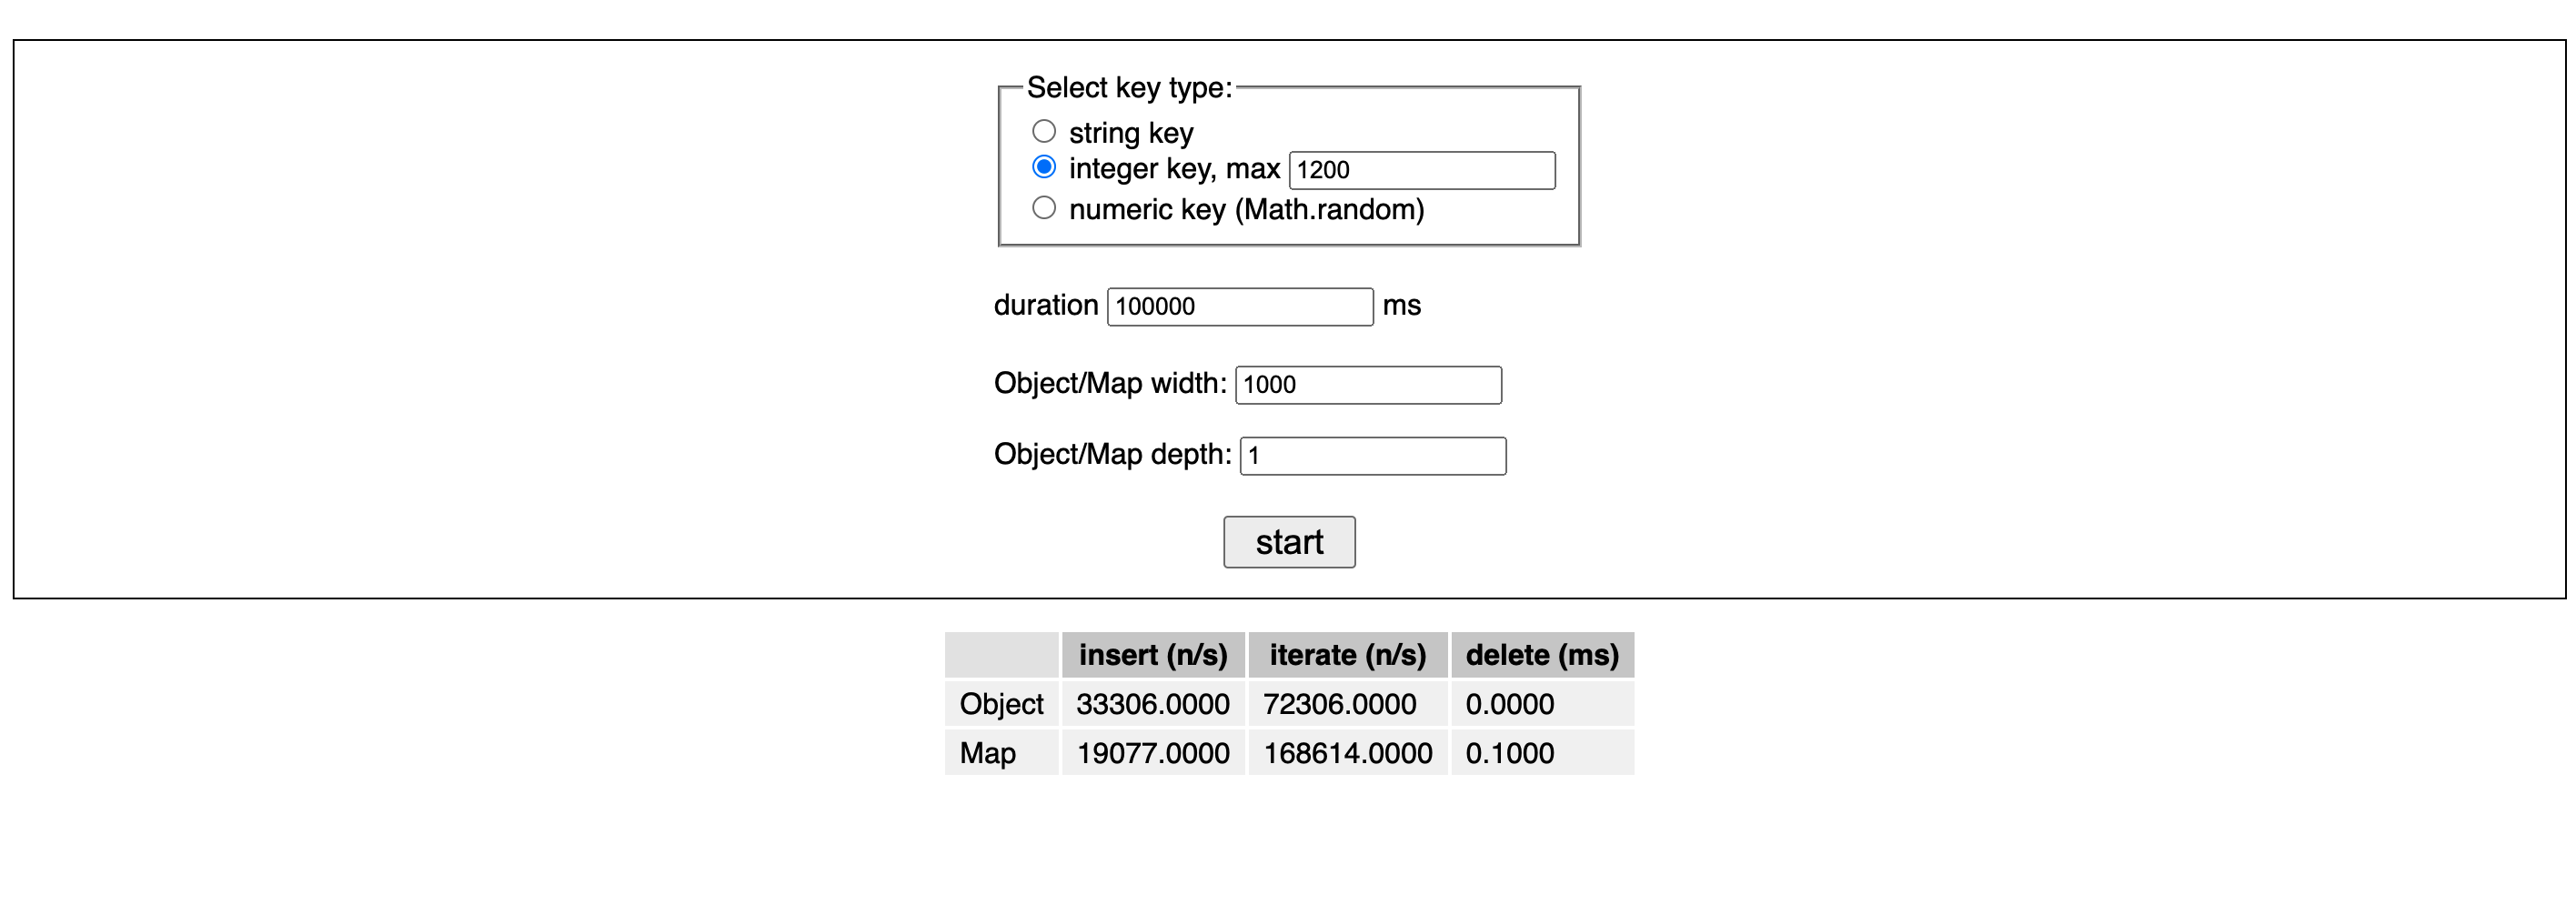 Object vs Map insertion performance with integer keys with 1000 properties